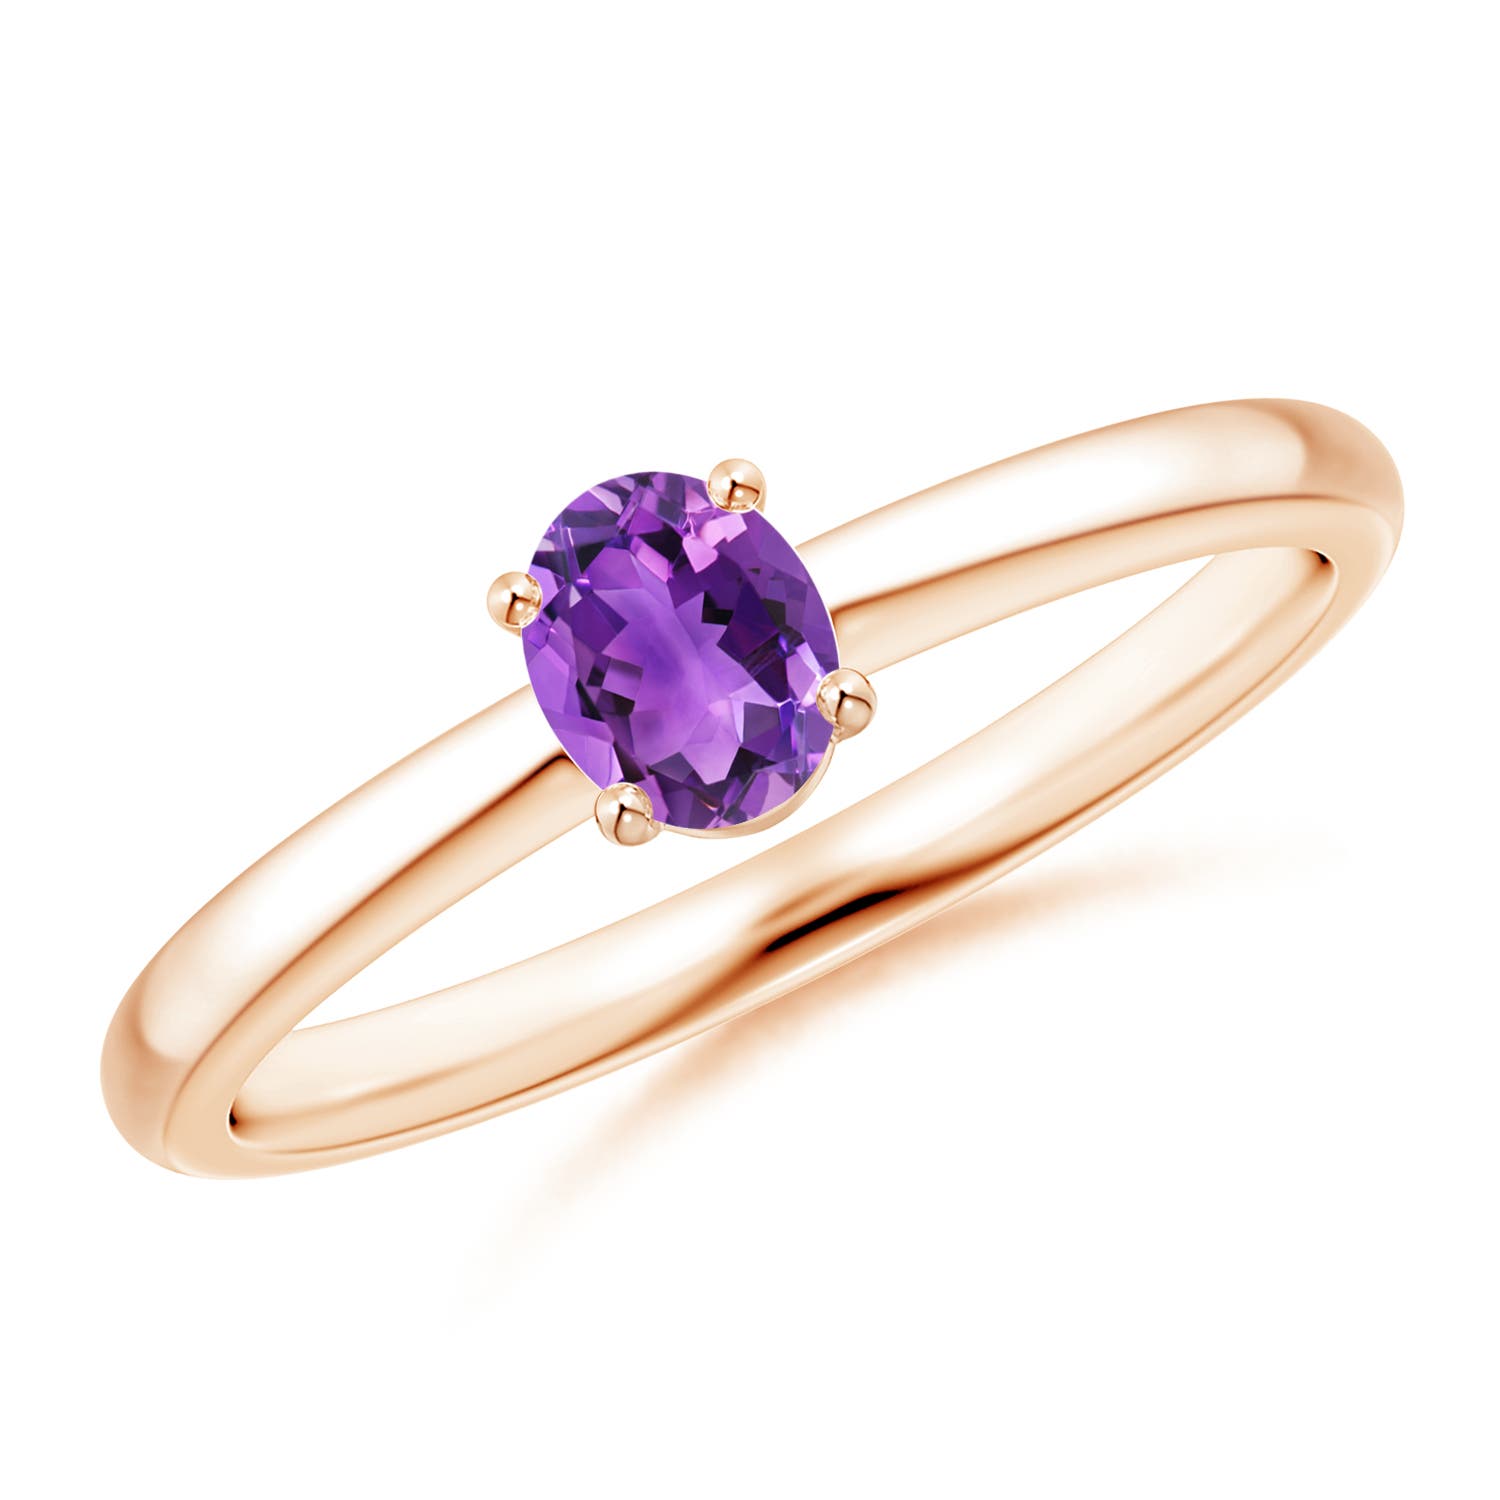 AAA - Amethyst / 0.3 CT / 14 KT Rose Gold